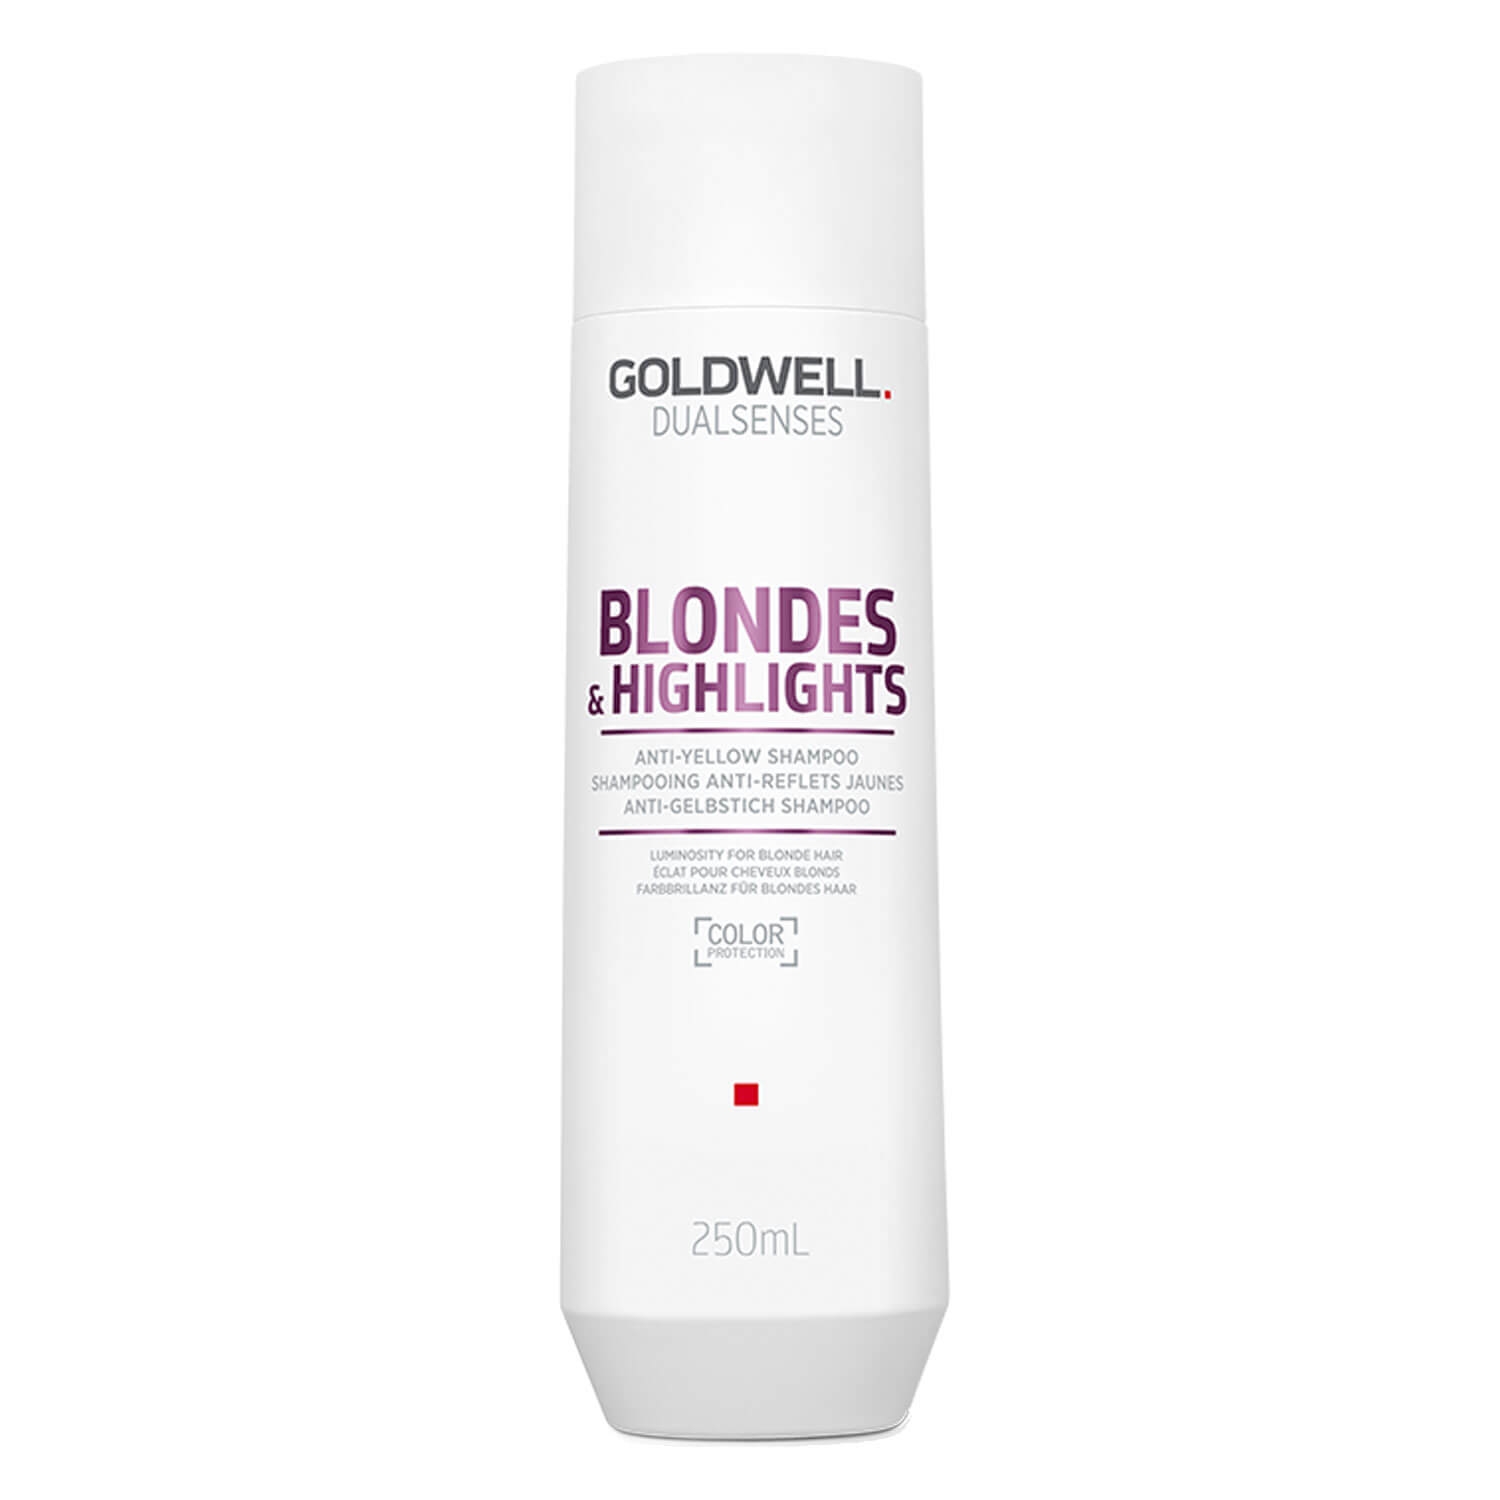 Product image from Dualsenses Blondes & Highlights - Anti-Yellow Shampoo